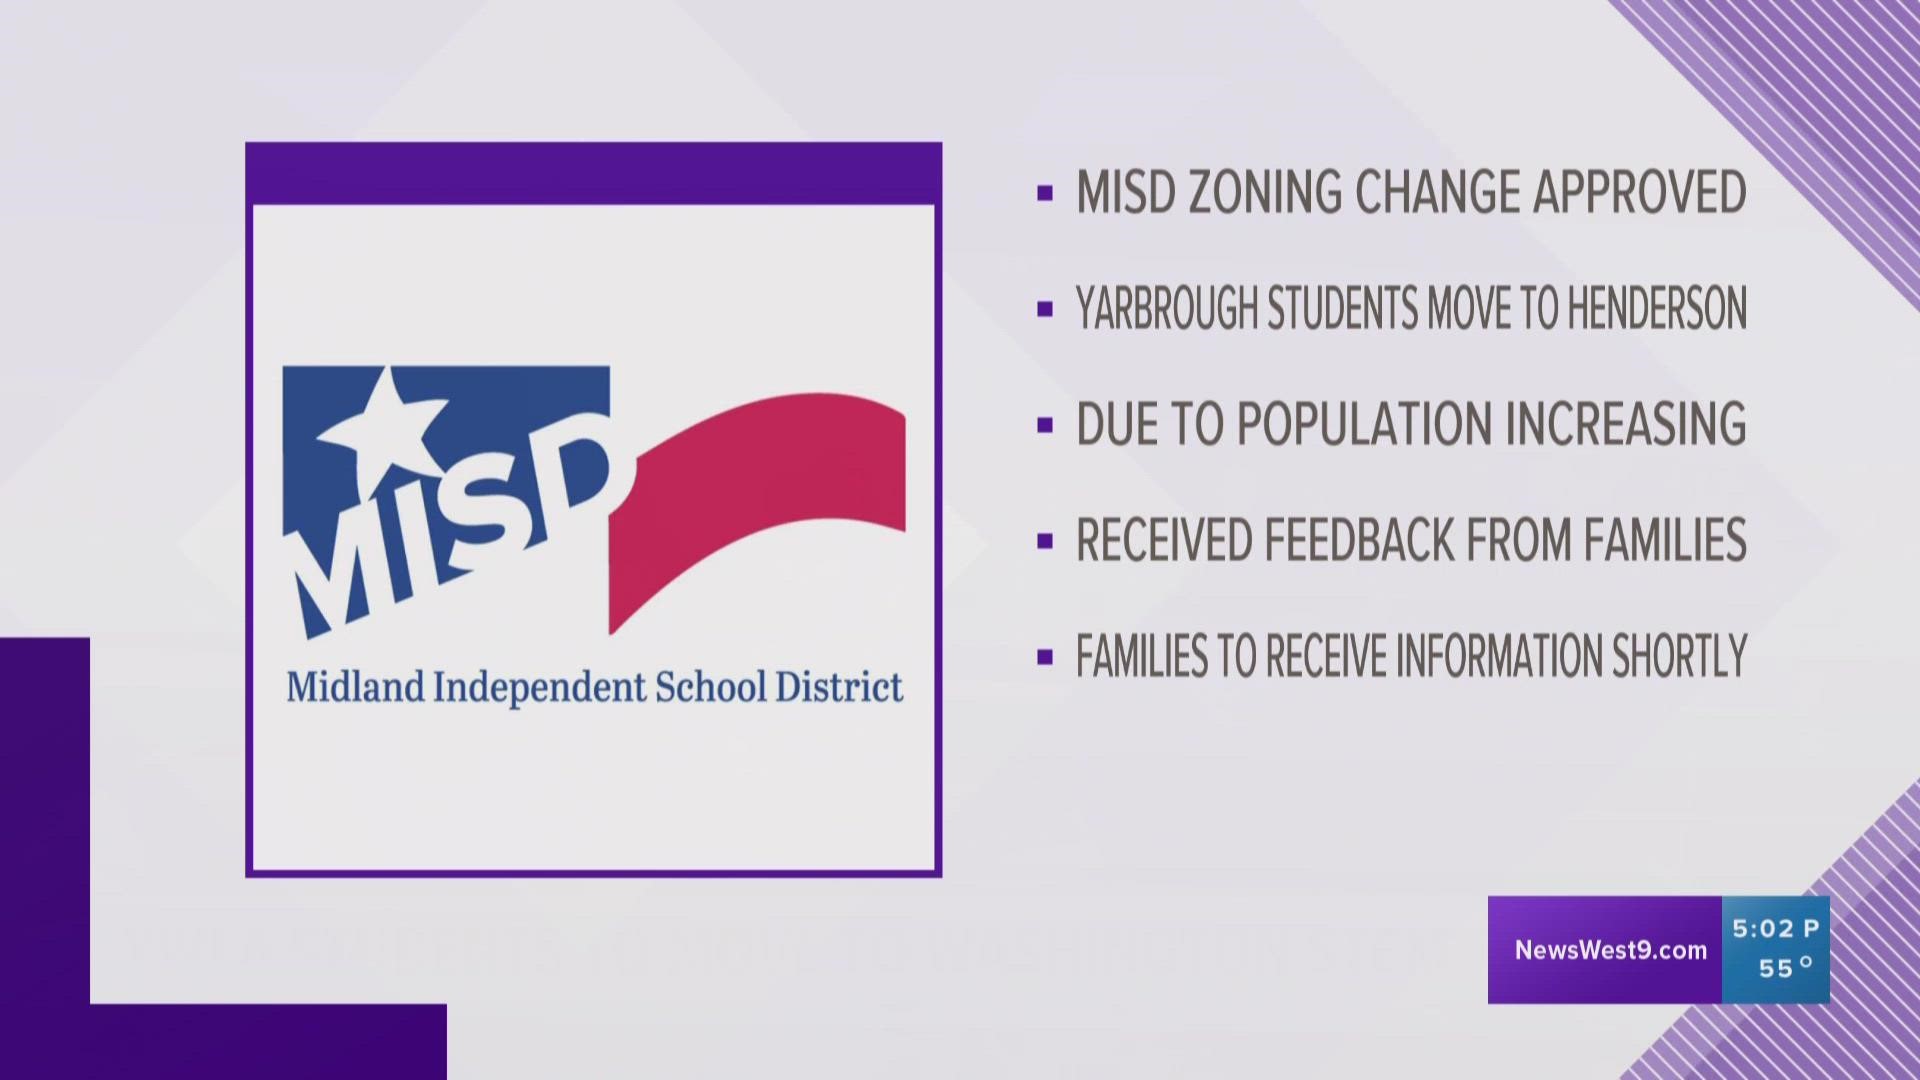 This change will move some Yarbrough Elementary students to Henderson Elementary.